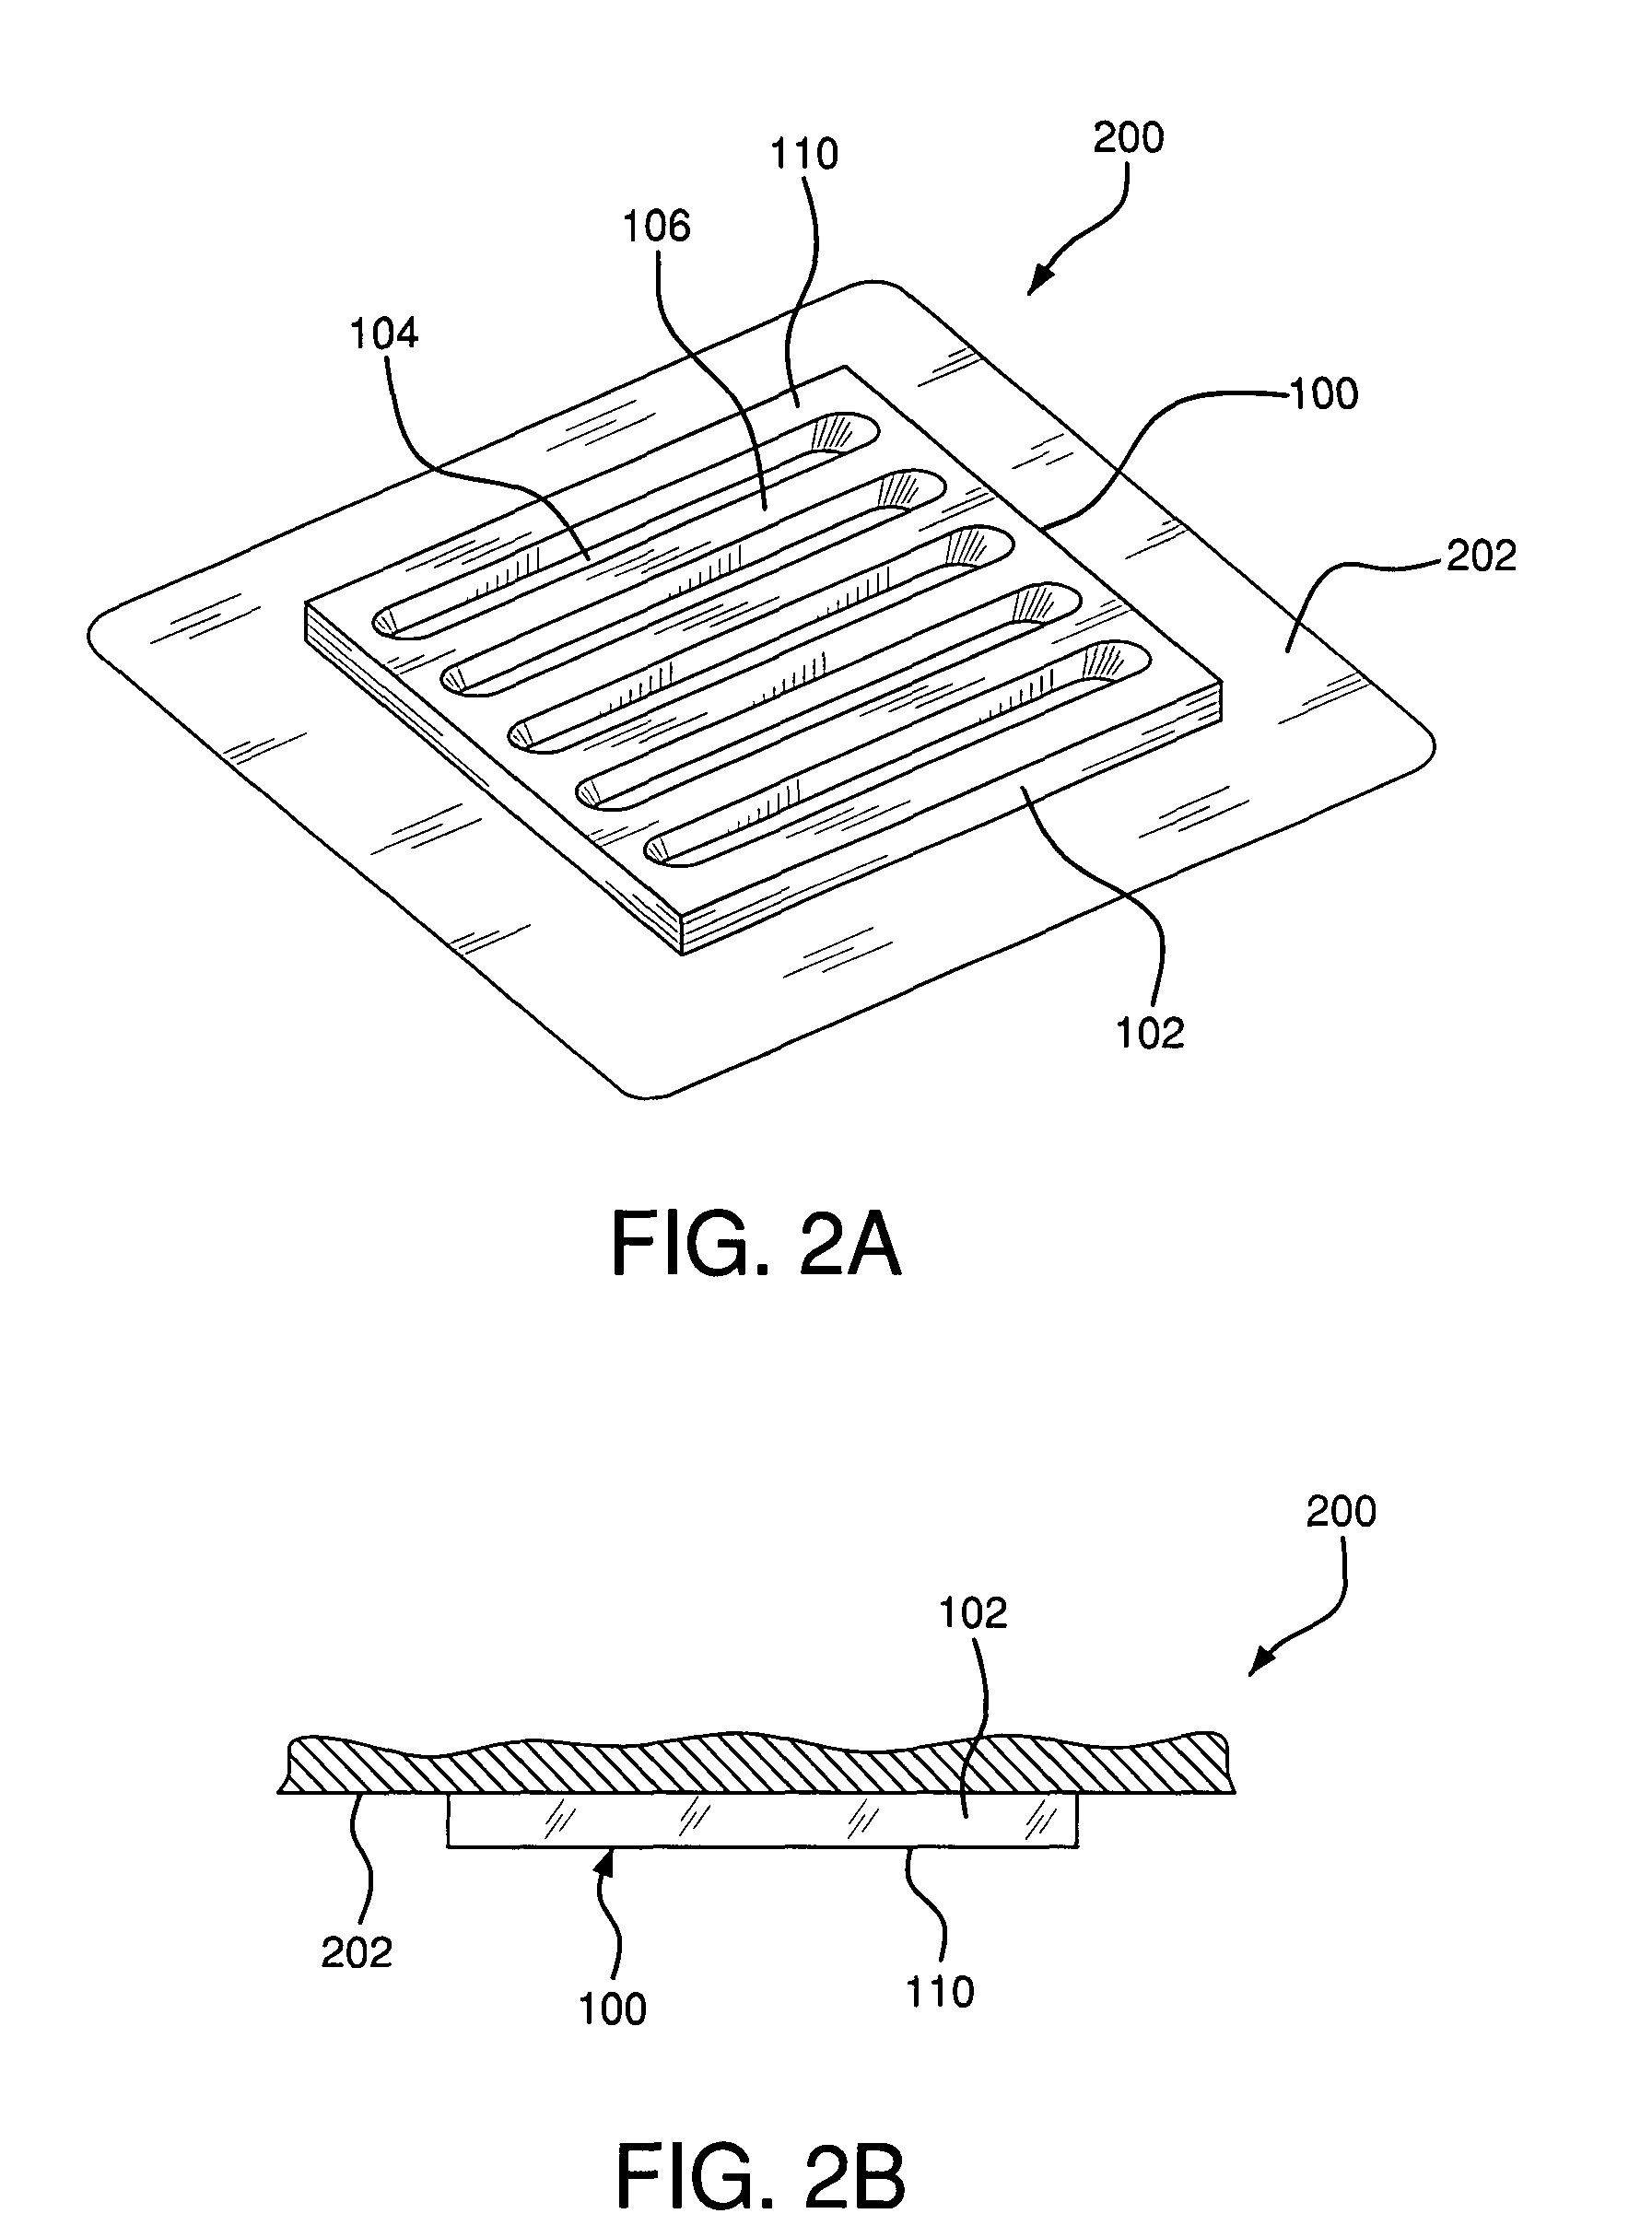 Growth stimulating wound dressing with improved contact surfaces